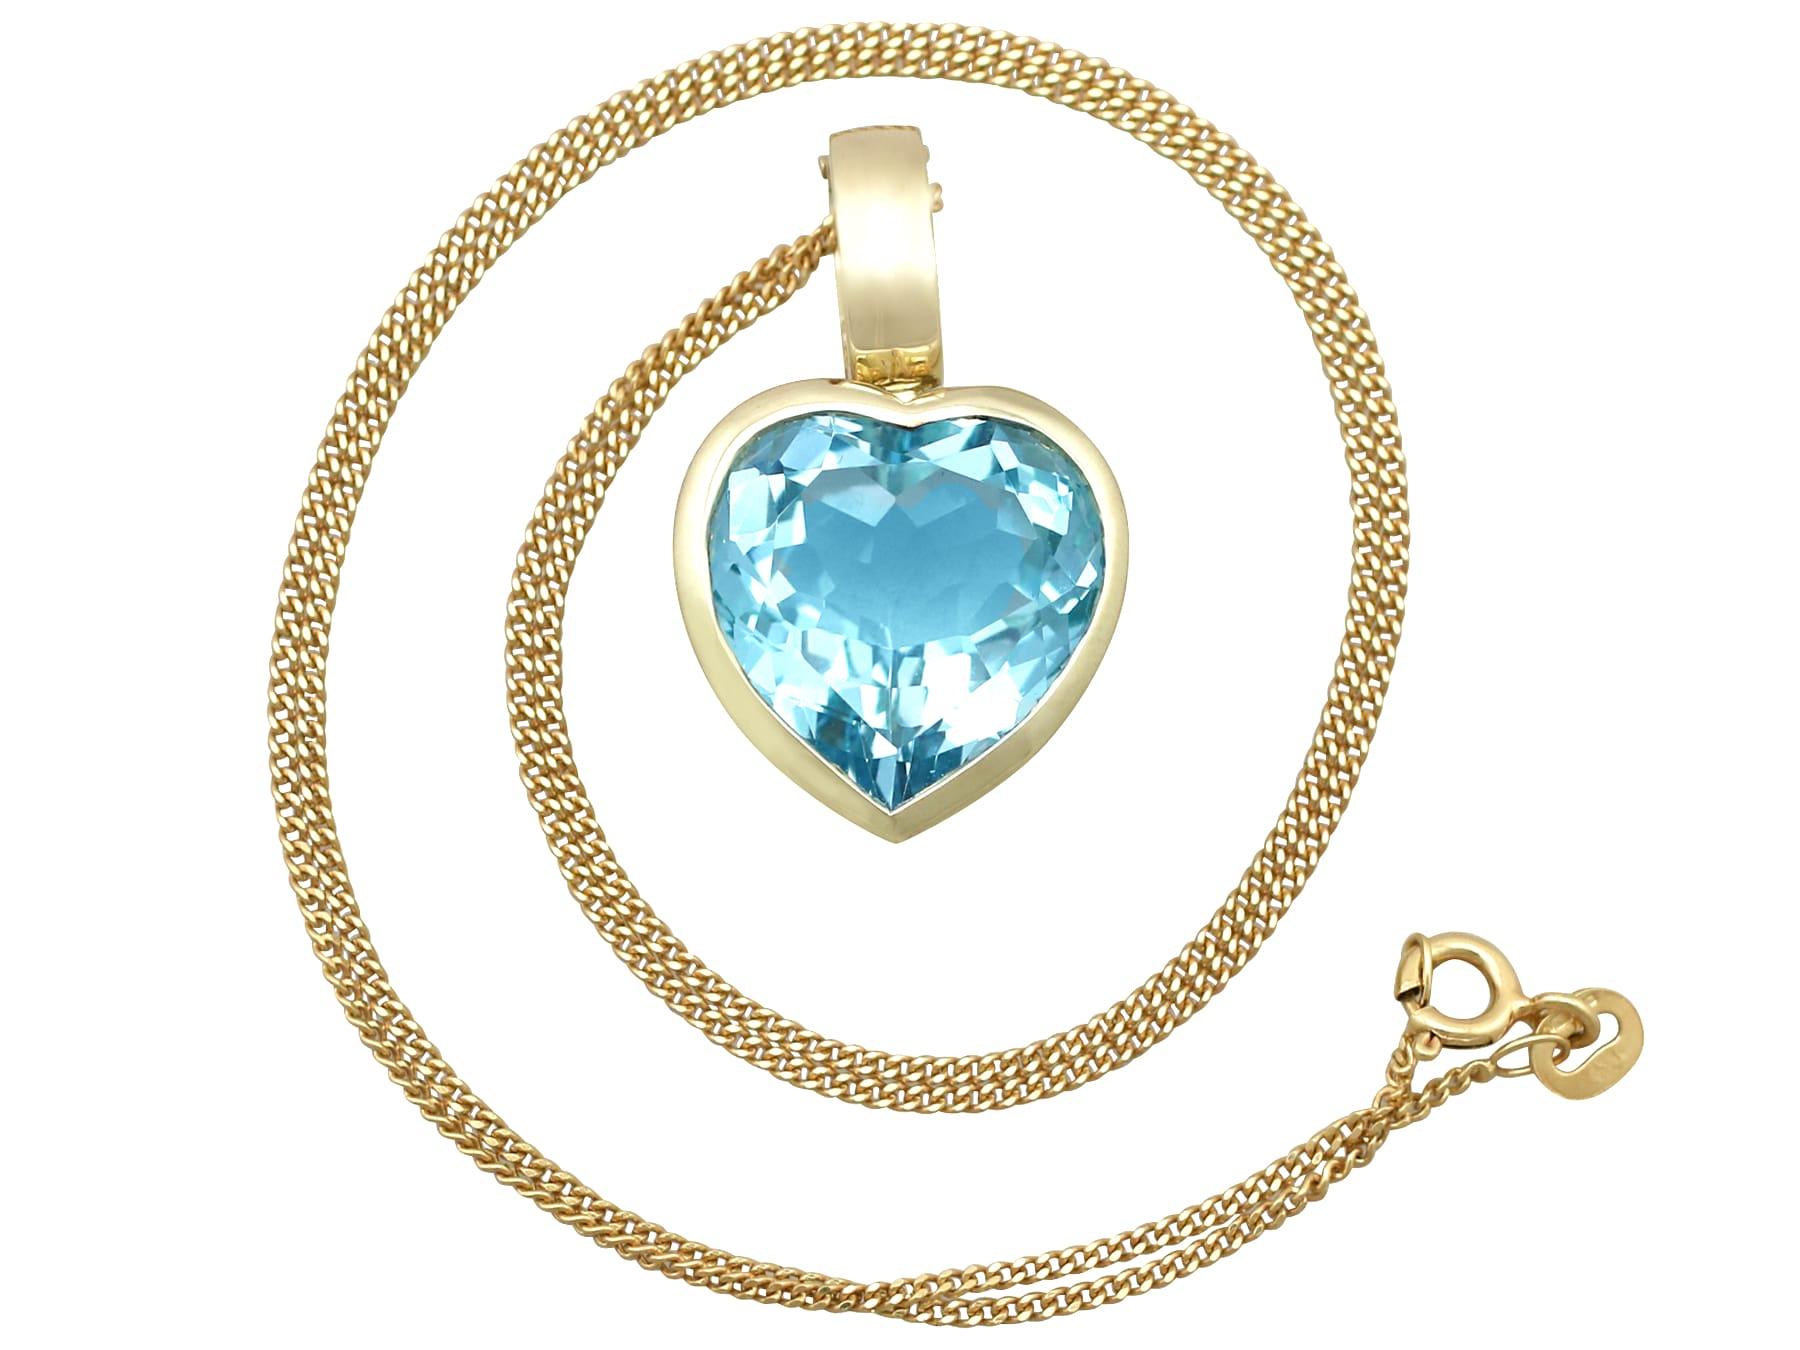 A fine and impressive 13.50 carat blue topaz and 9 karat yellow gold heart shaped pendant; part of our diverse vintage jewelry and estate jewelry collections.

This fine and impressive topaz heart pendant has been crafted in 9k yellow gold.

The